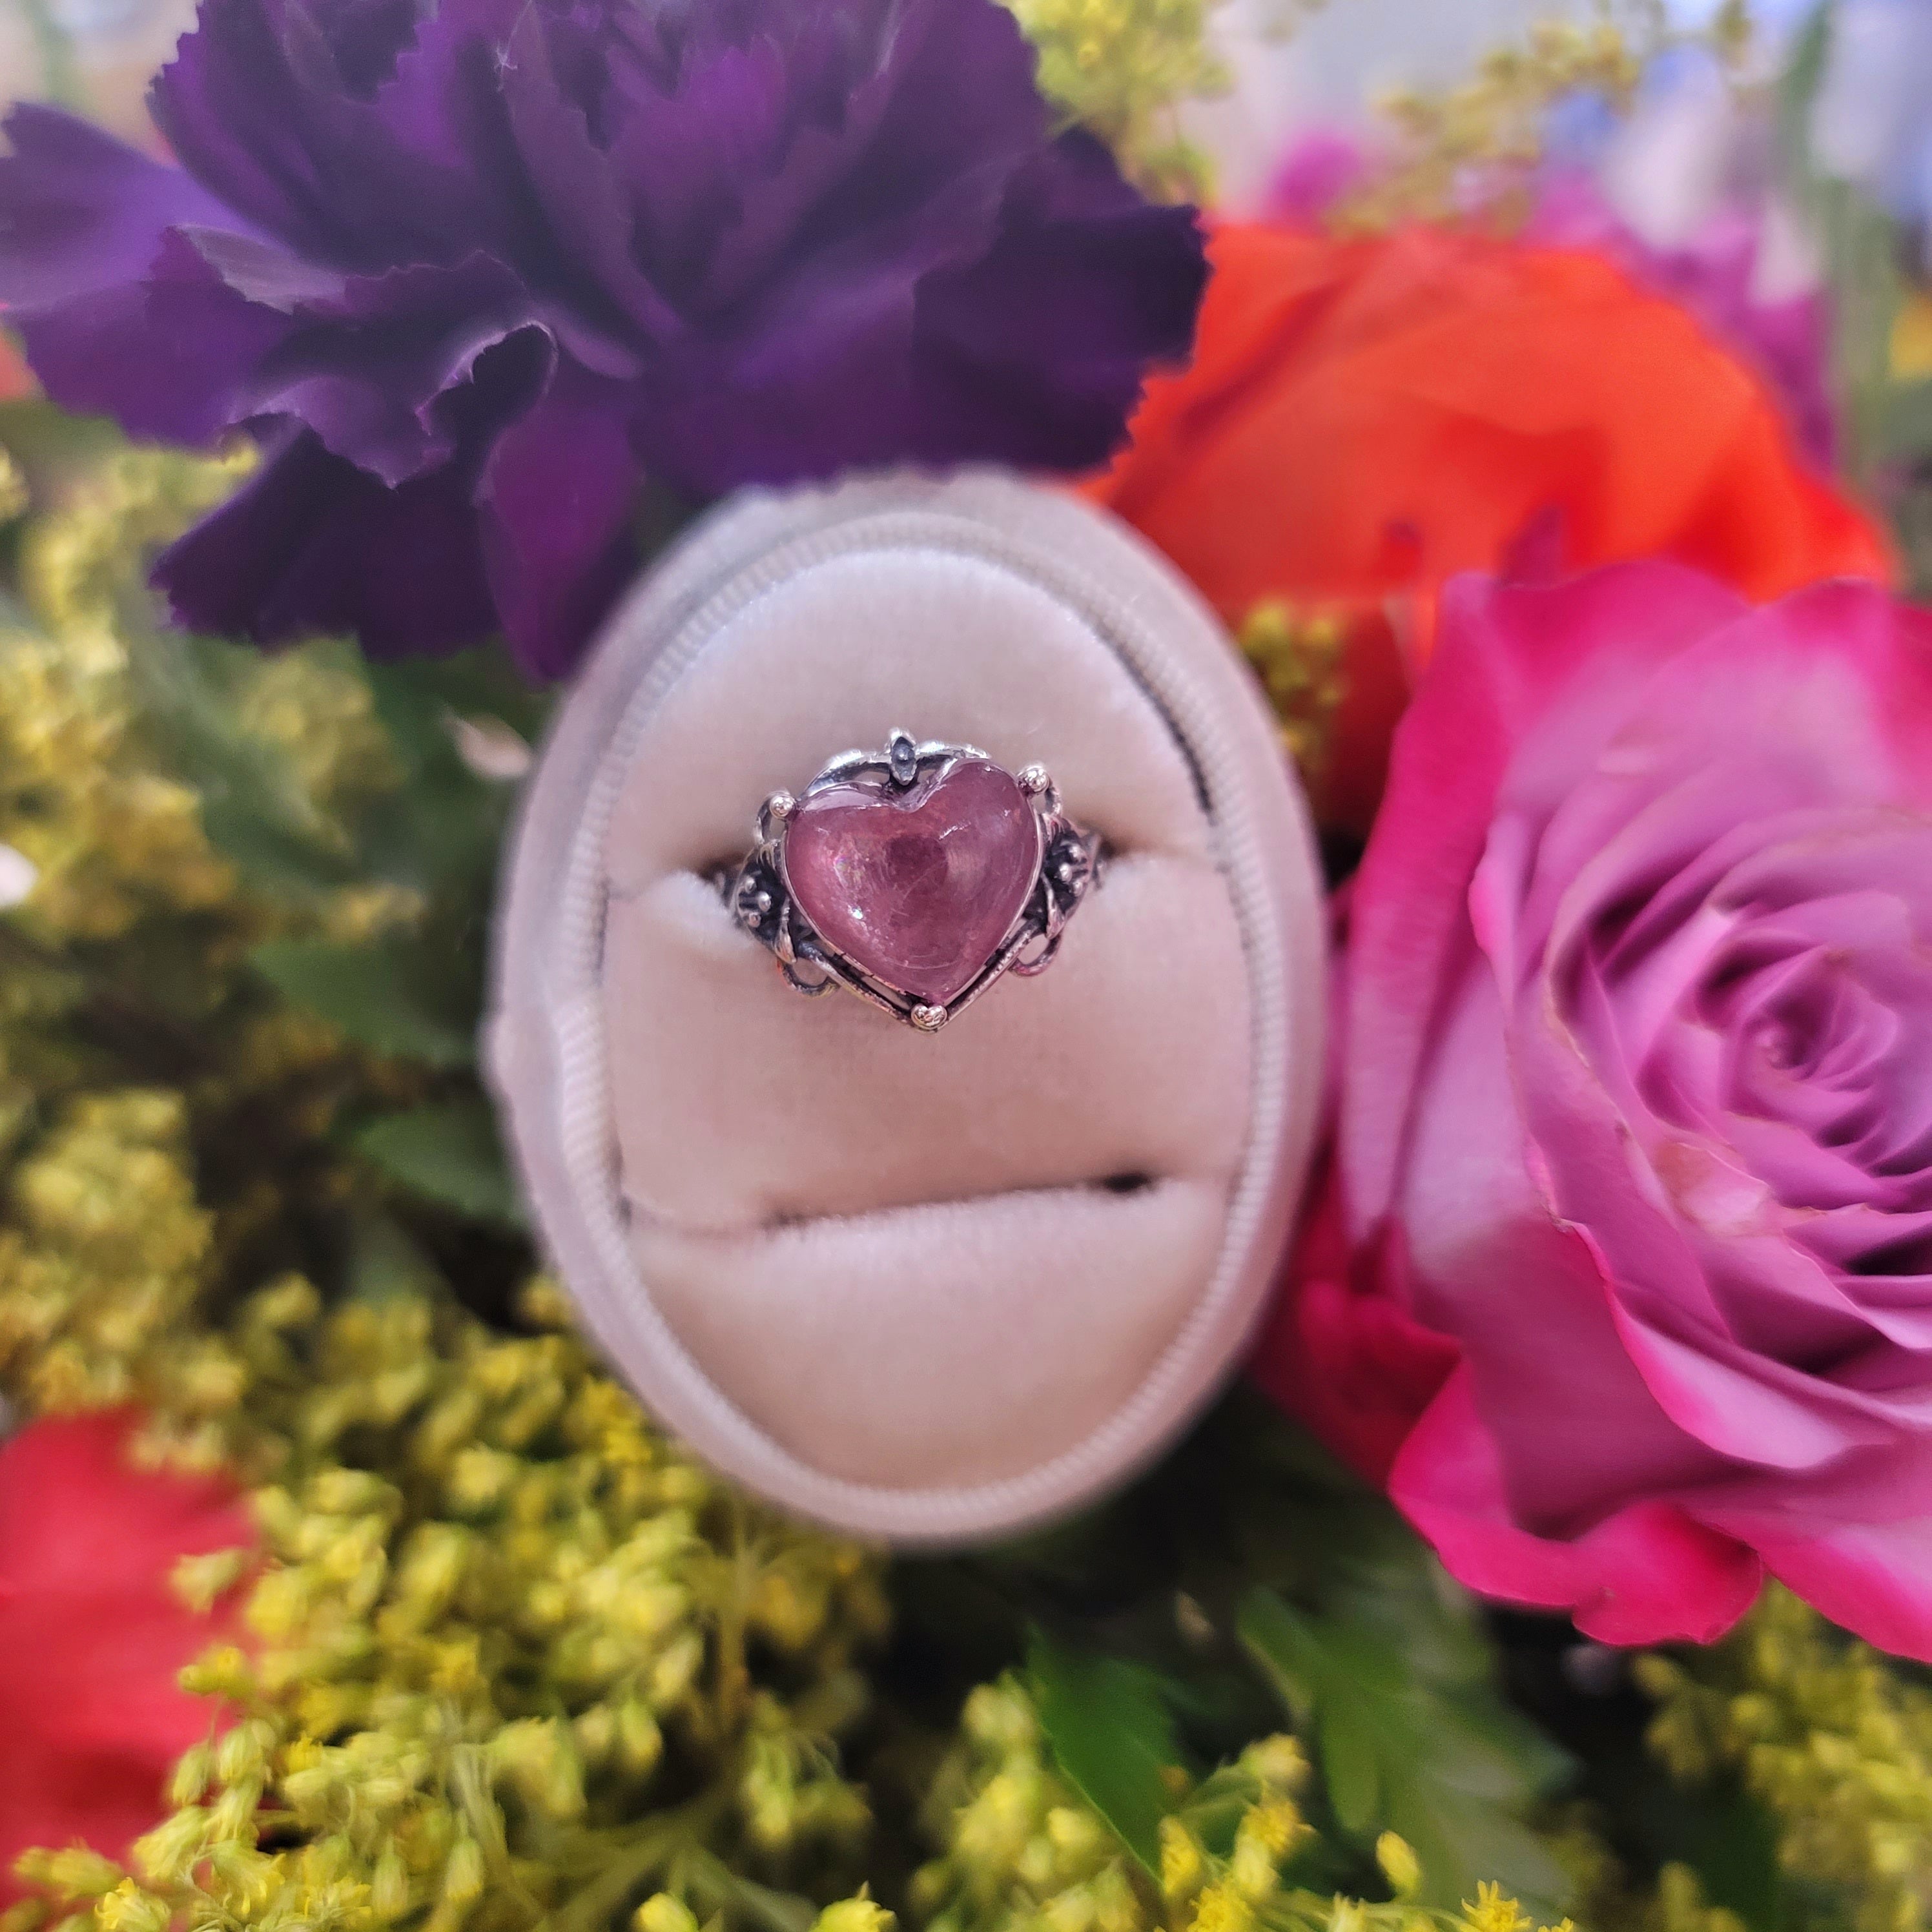 Gem Lepidolite Vintage Style Heart Adjustable Ring .925 Silver for Anxiety Support, Joy and Stress Relief